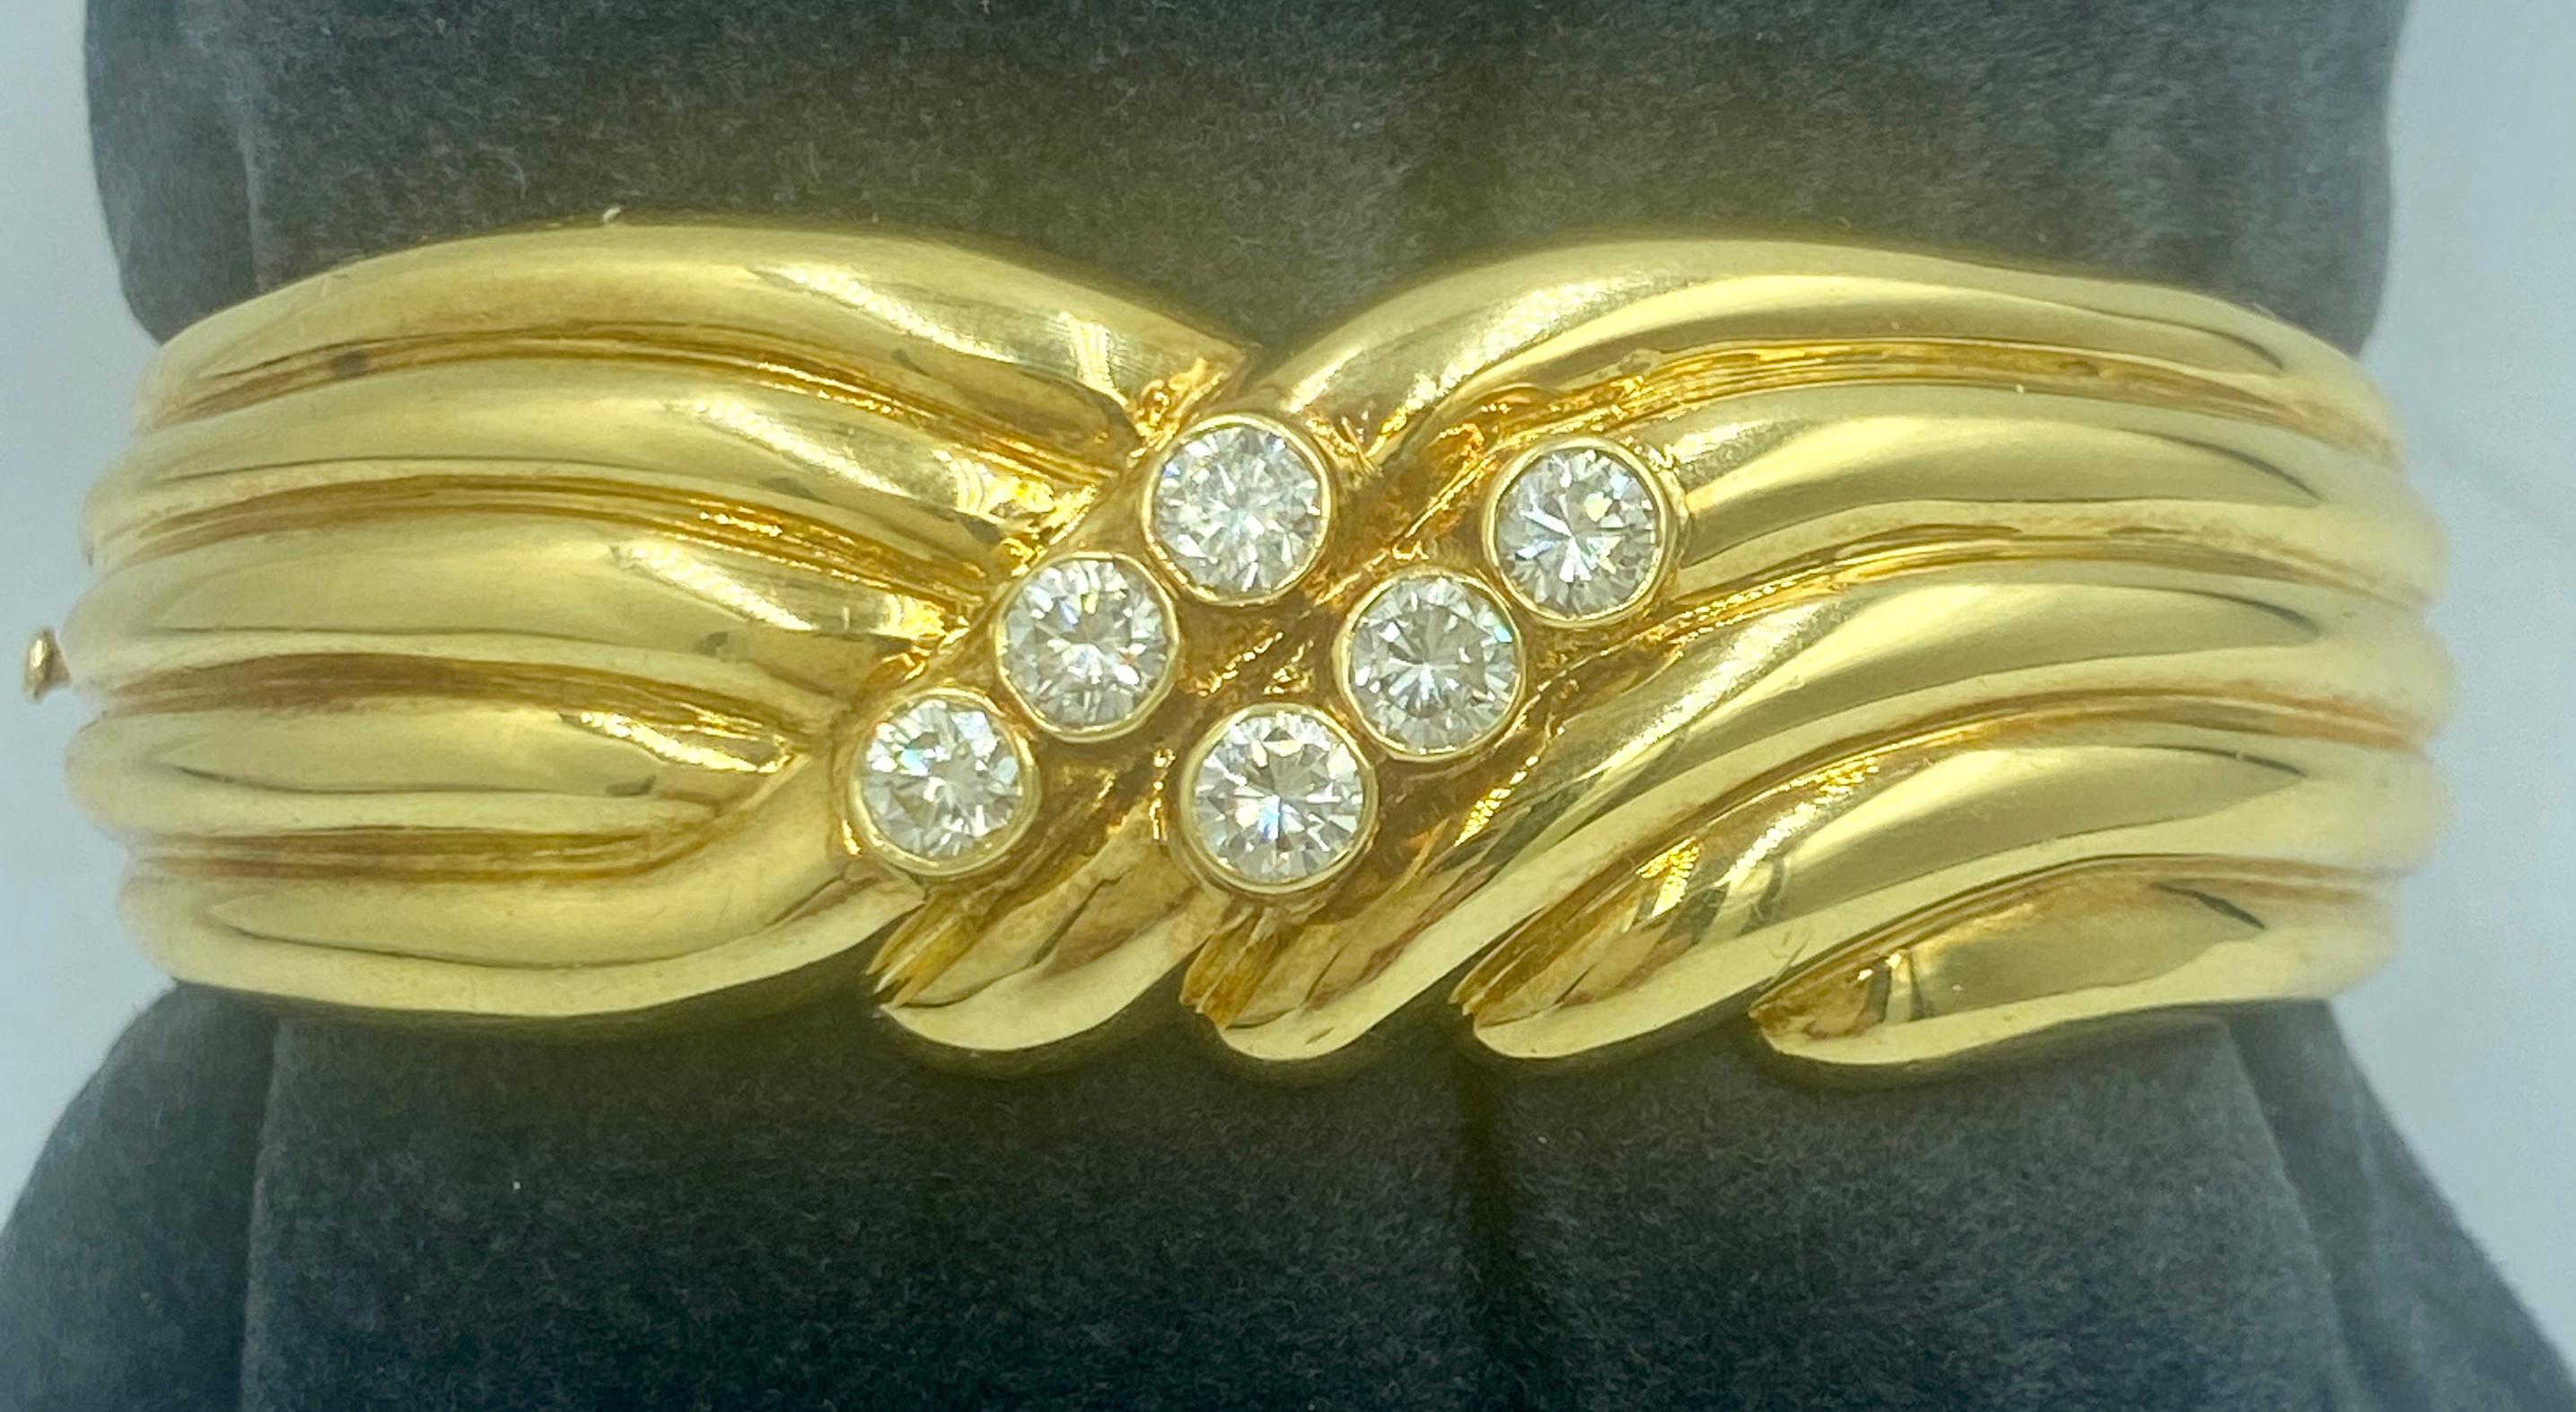 A beautifully chunky 18k gold cuff European made in 1970s, this bangle has a striking swirl design which is accented with 6 round cut diamonds totalling 1.56 carats. The inner circumference of the cuff measures 18cm. It is a stunning piece.